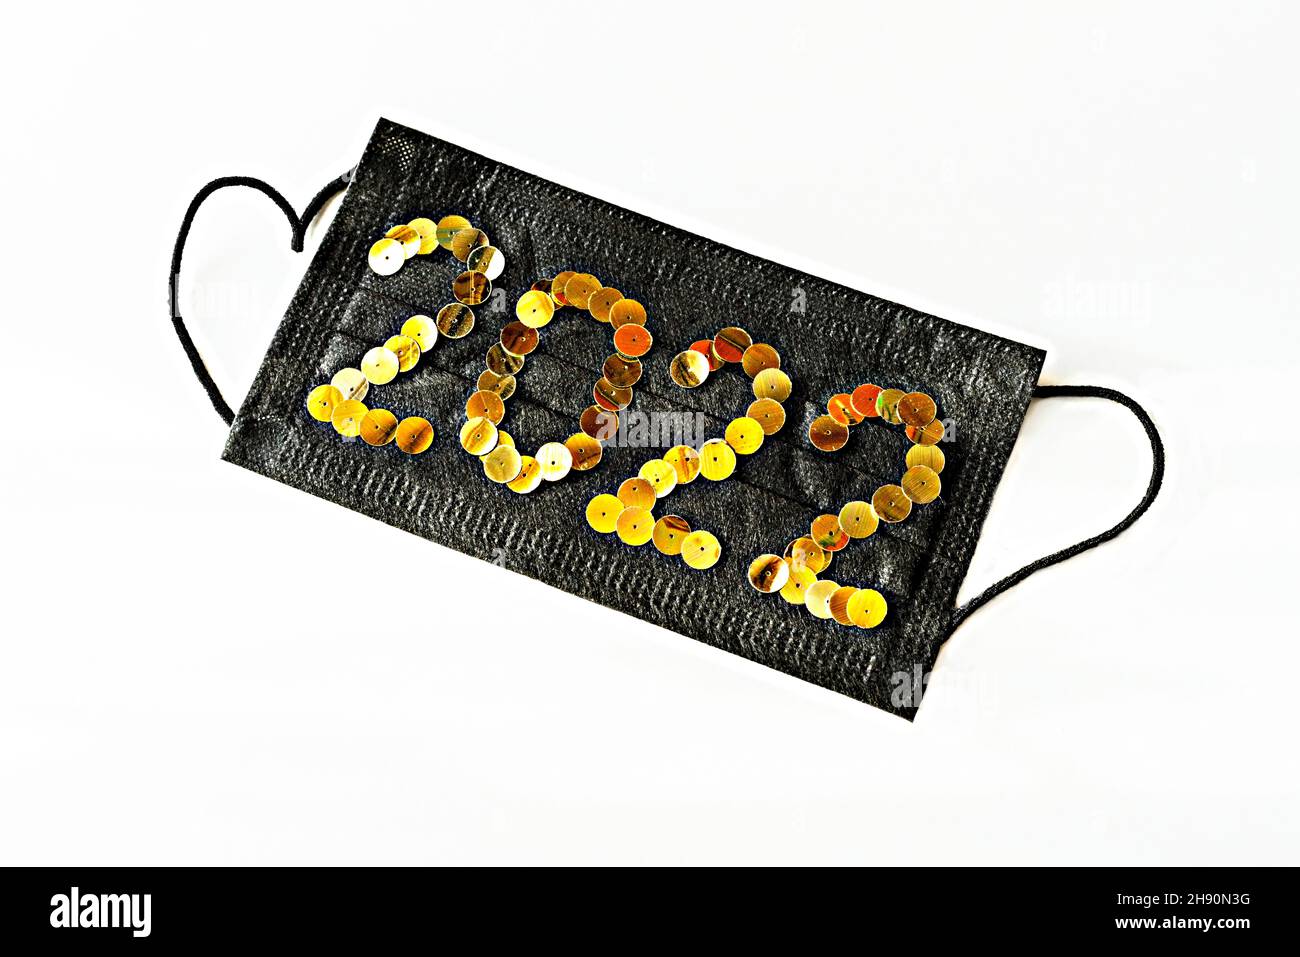 Black medical face protective mask with new year 2022 numbers made of golden sequins on a white background close-up Stock Photo